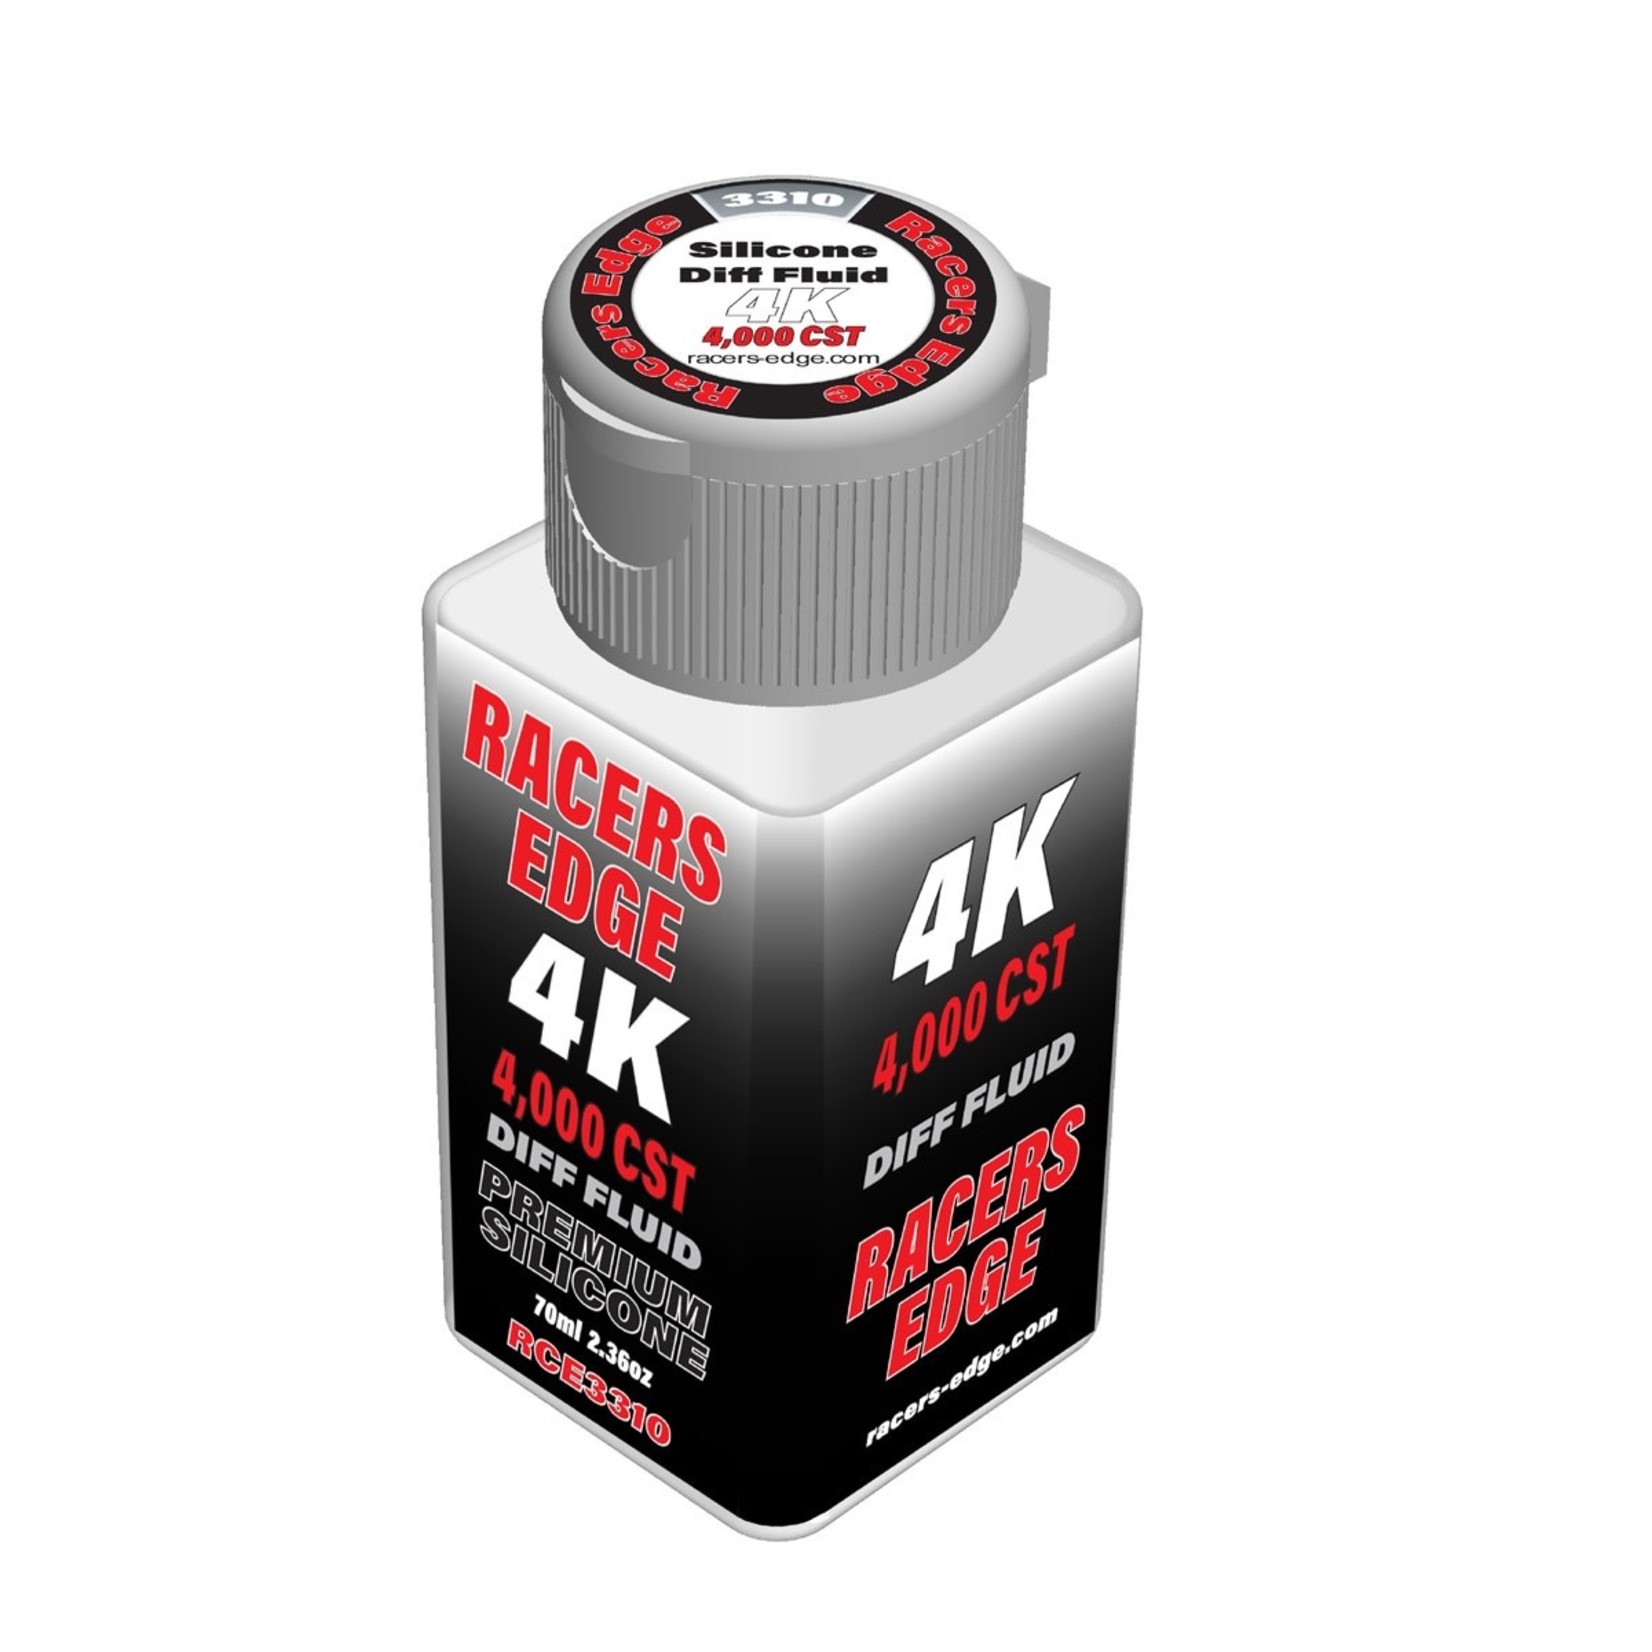 Racers Edge RCE3310 Racers Edge Pure Silicone Diff Fluid 4,000cst 70ml 2.36oz